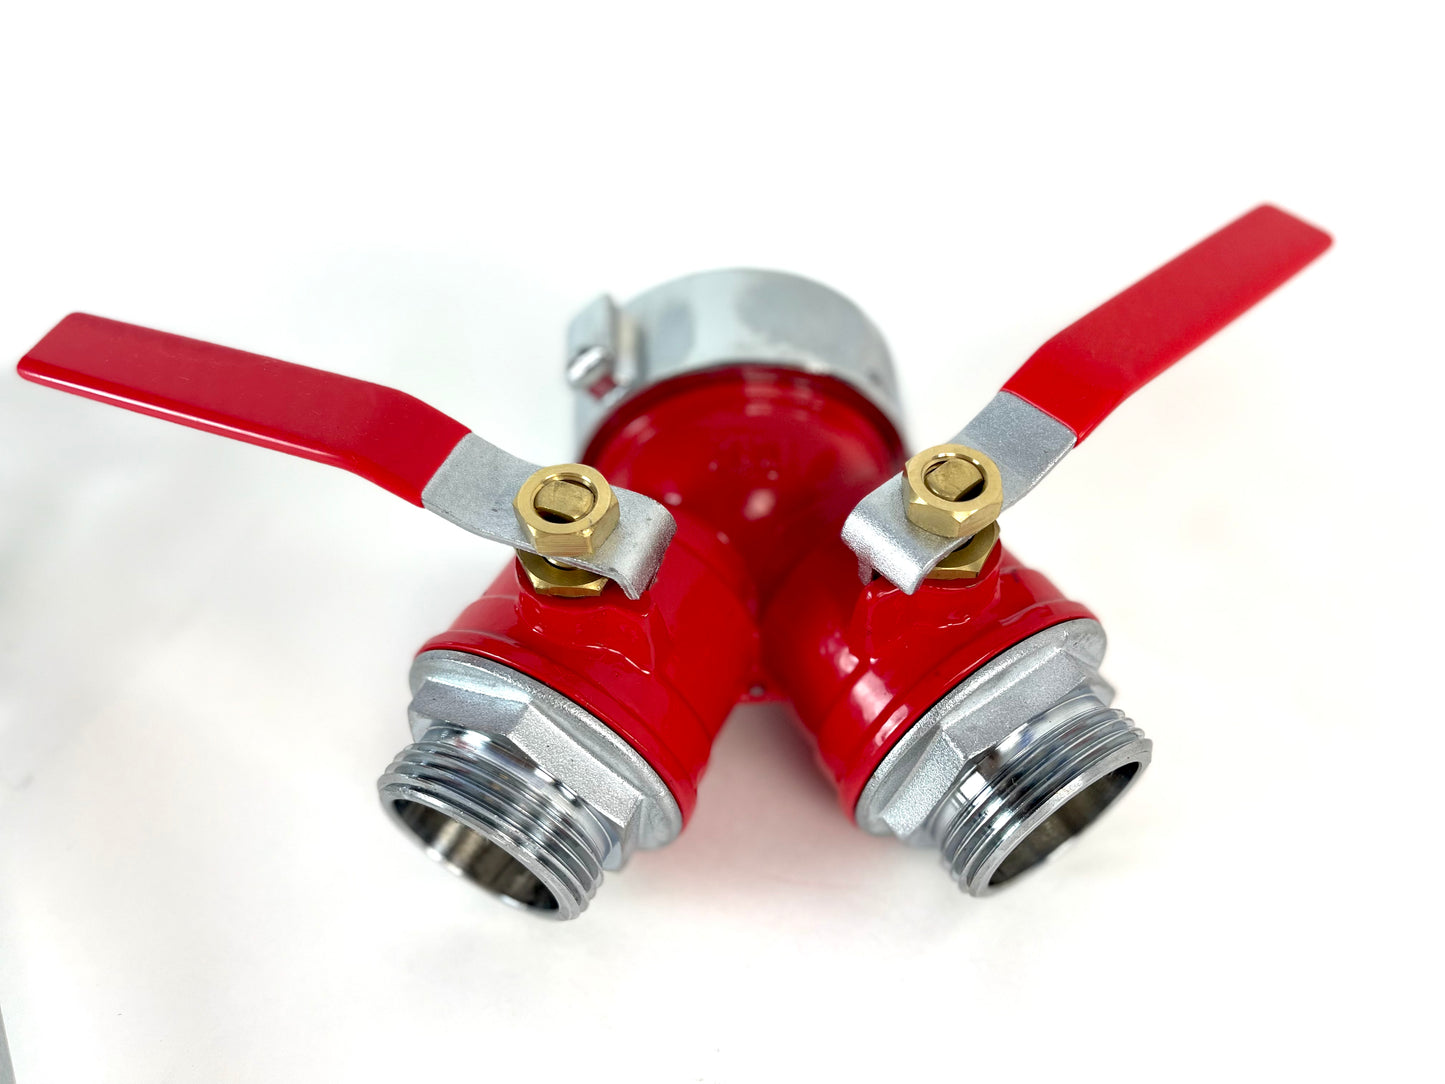 Fire Safe Home (2 pack 75' fire hoses) with Brass Fire Hydrant Connector Valve, Hydrant Wrench and 2 nozzles.